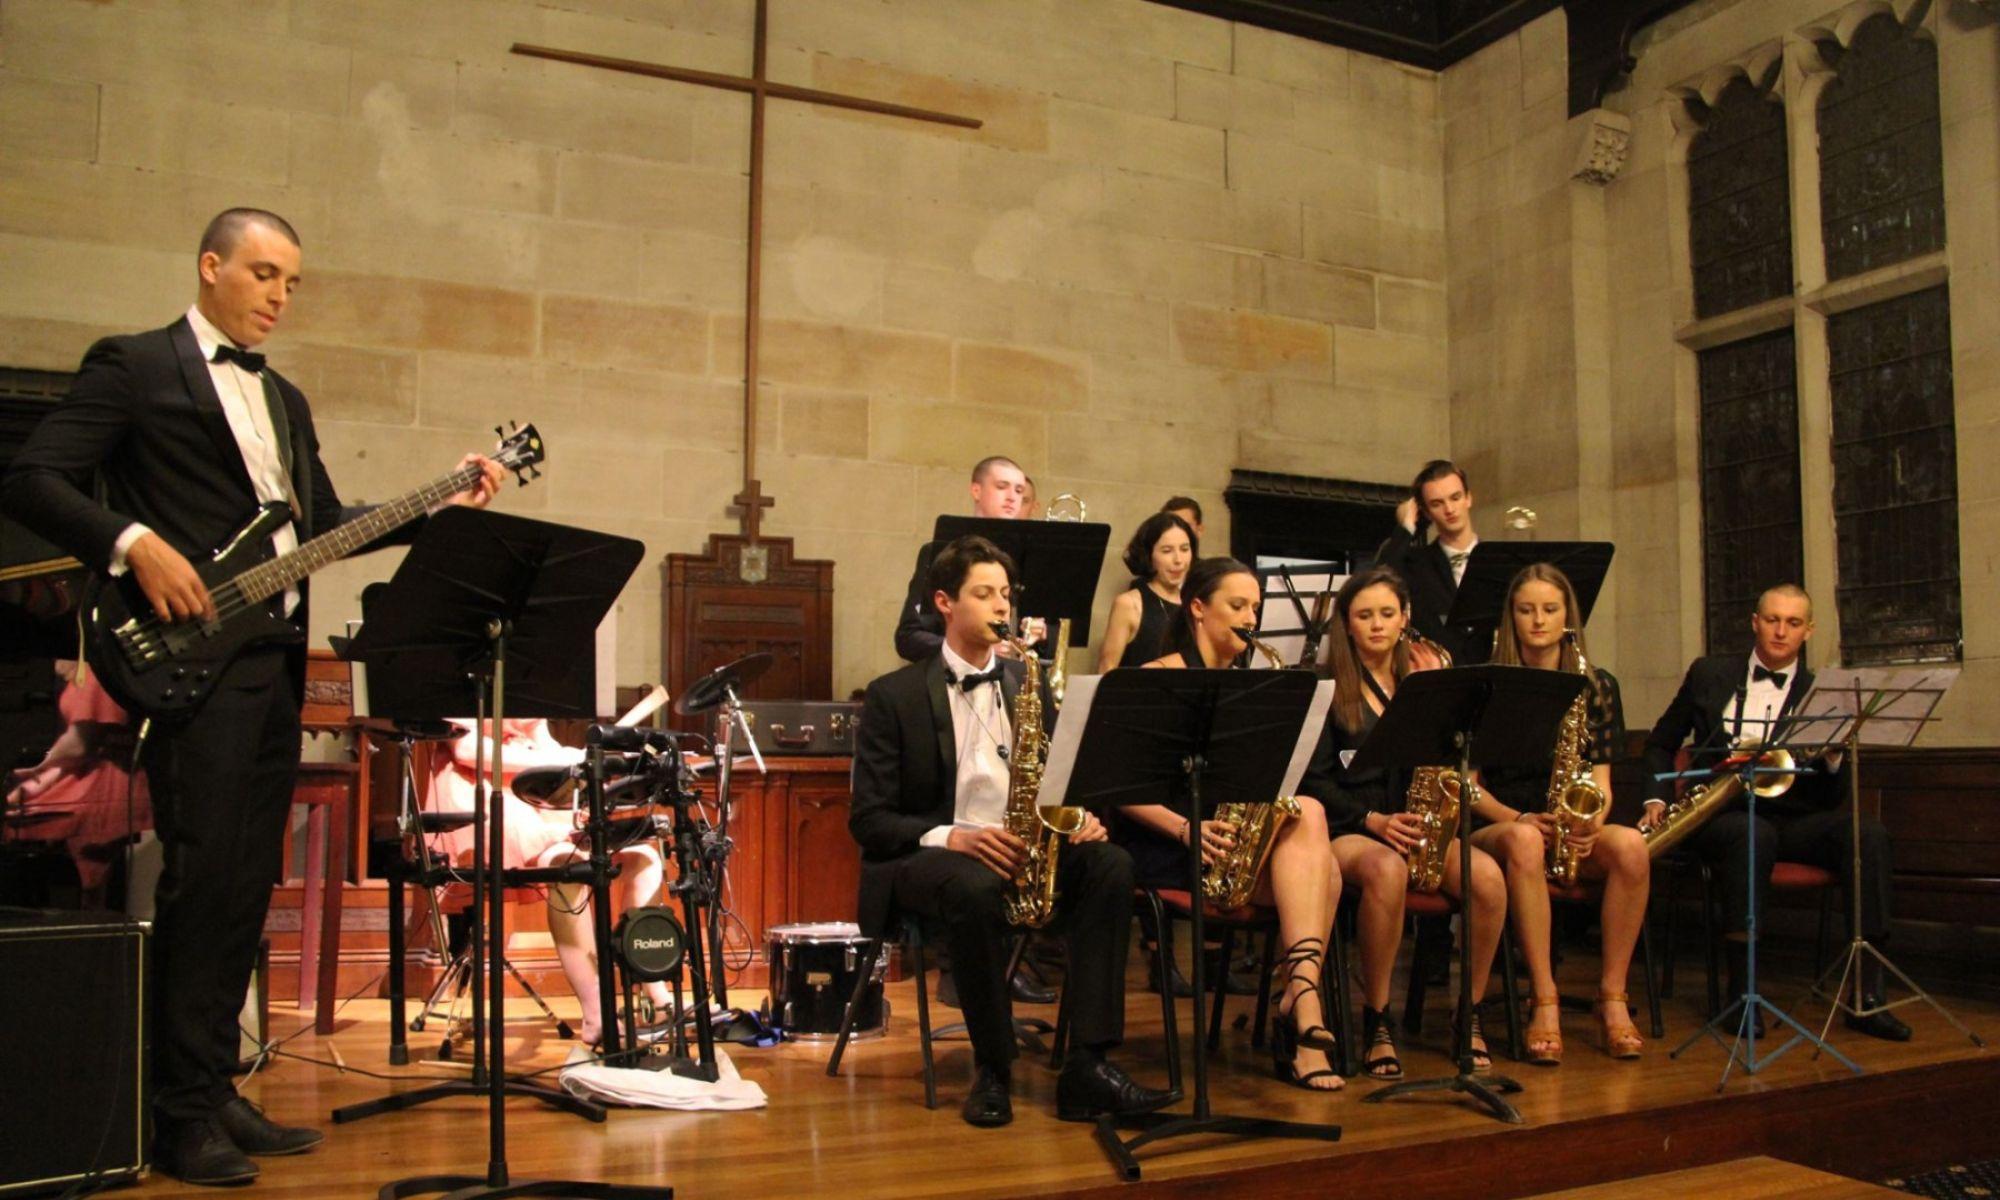 St Andrew's College Kinross Mackie Chapel conferences events stage music musicians band